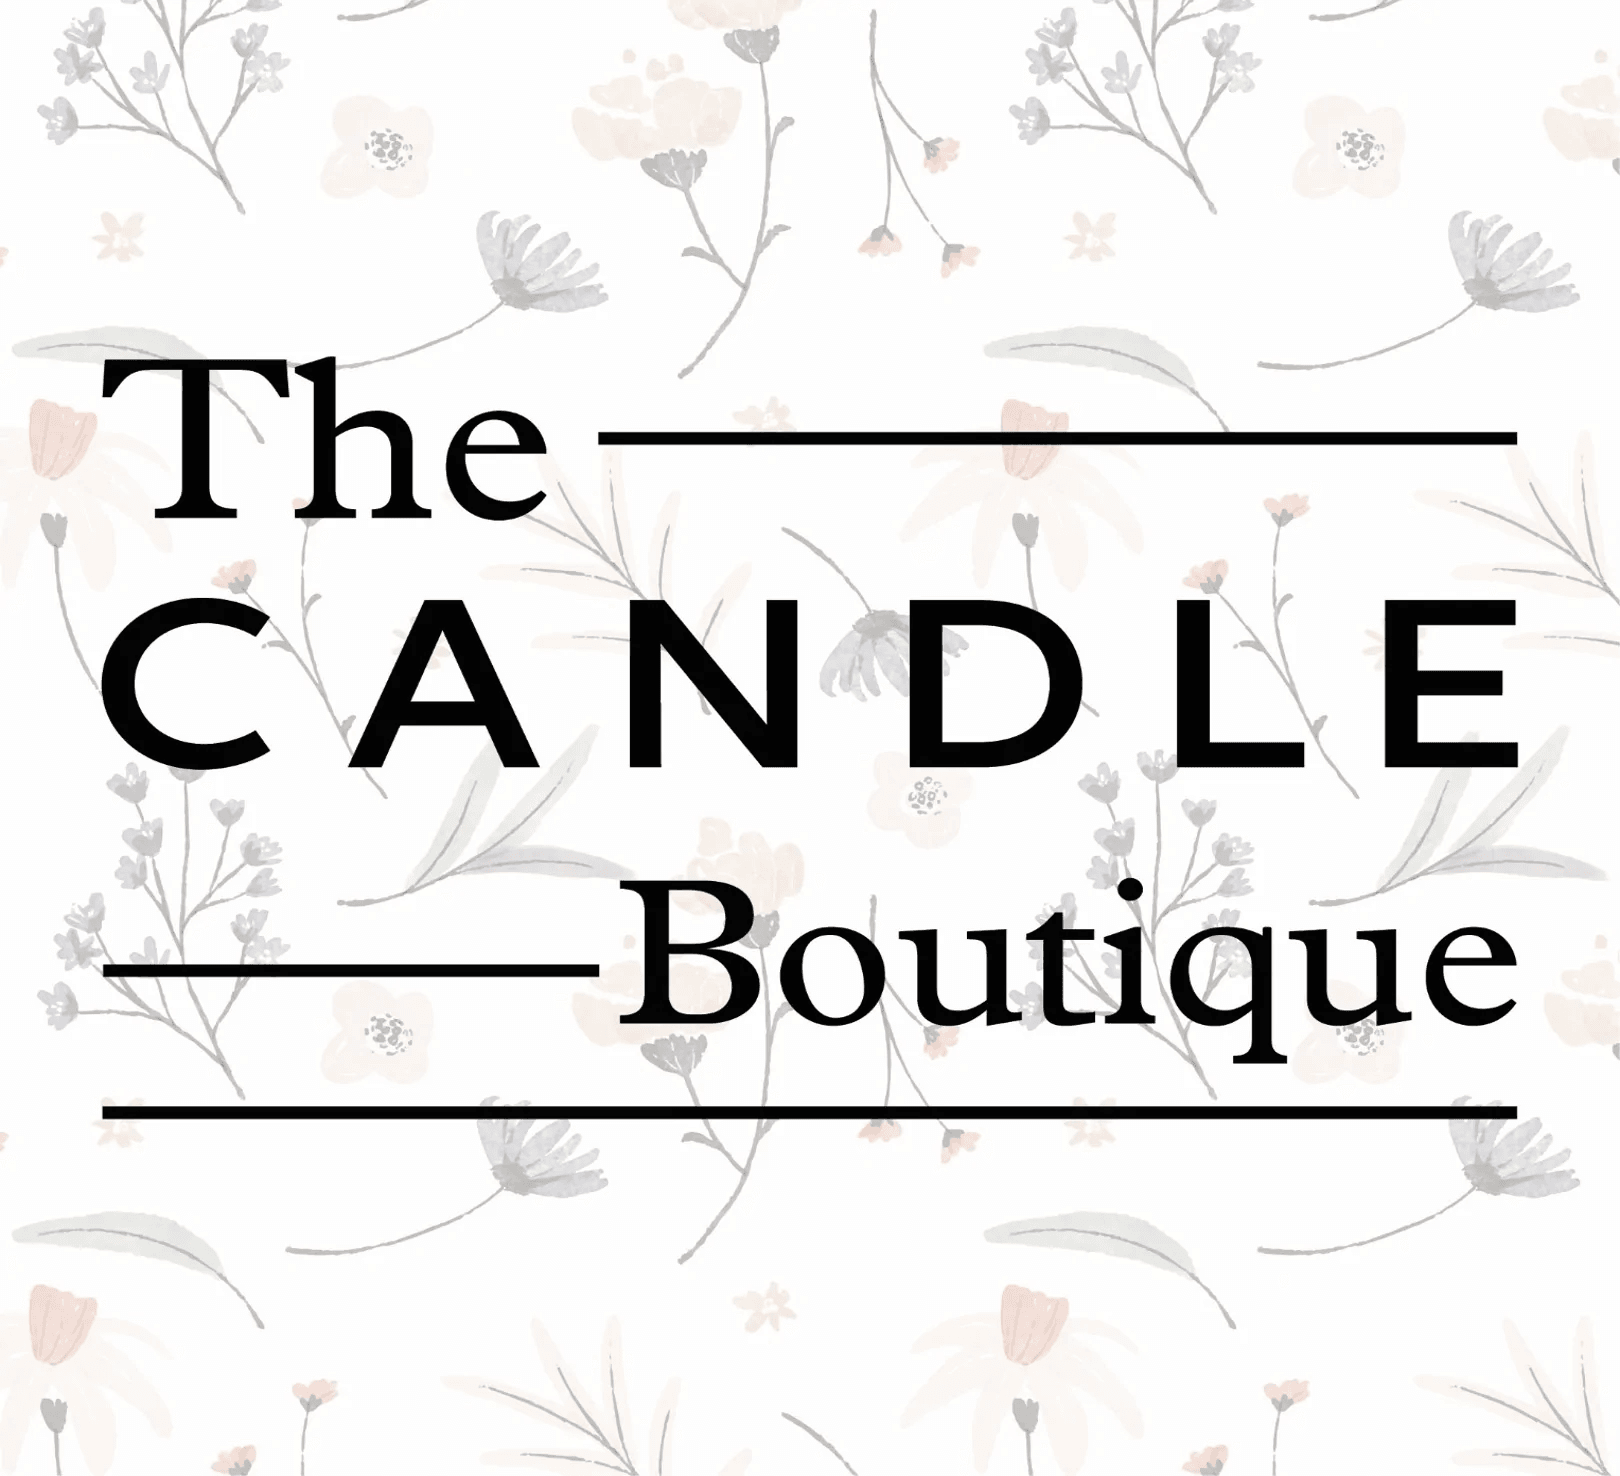 The Candle Boutique logo